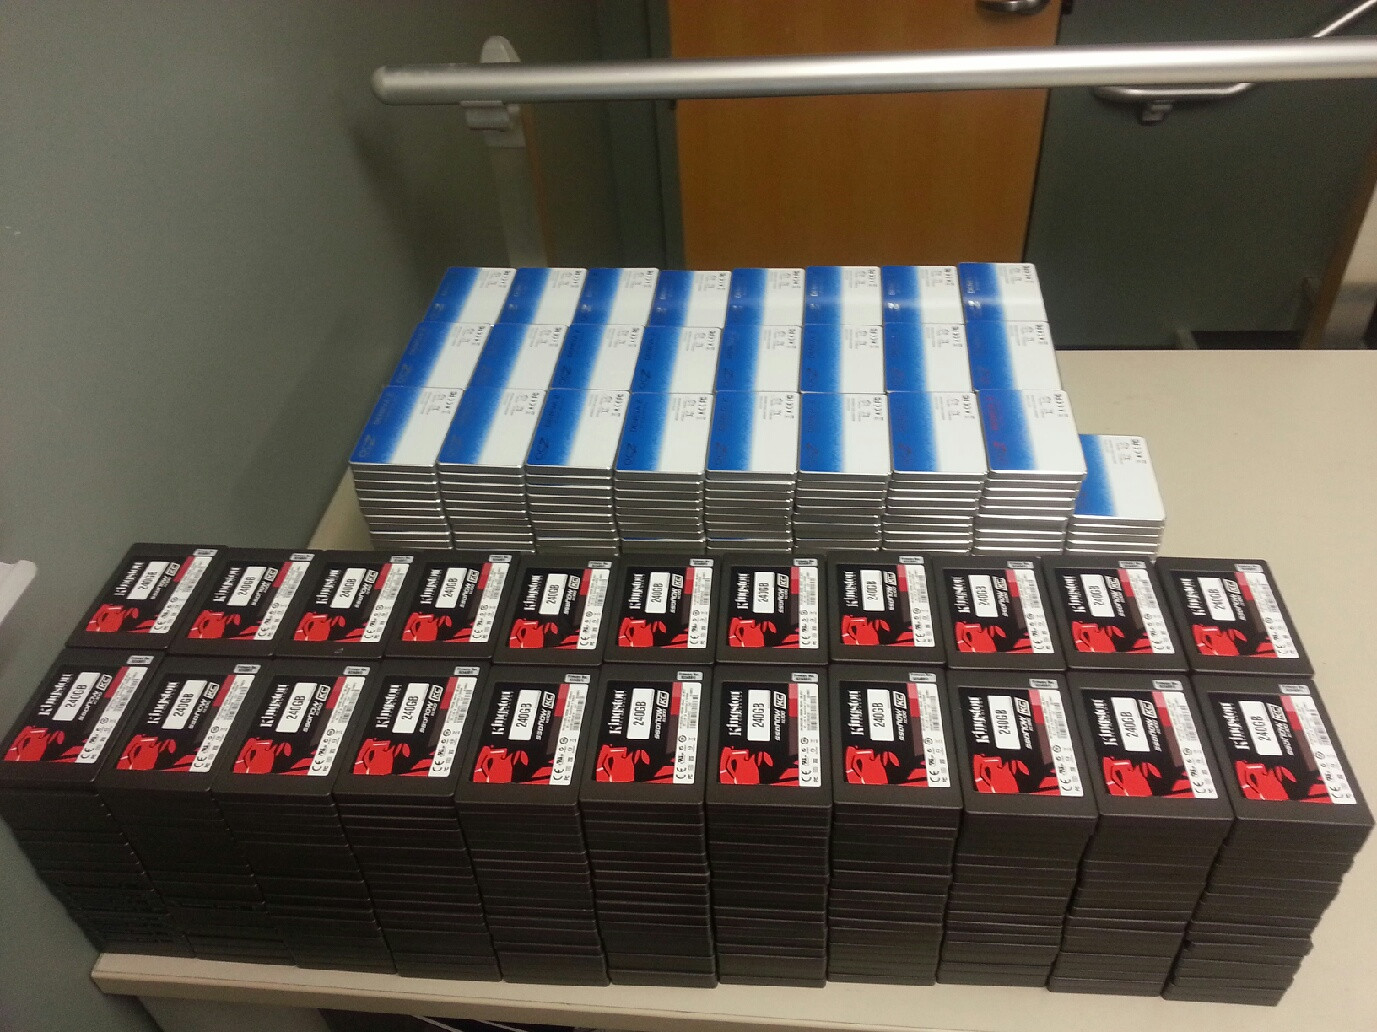 Ever wondered what around 150TB of SSDs might look like?